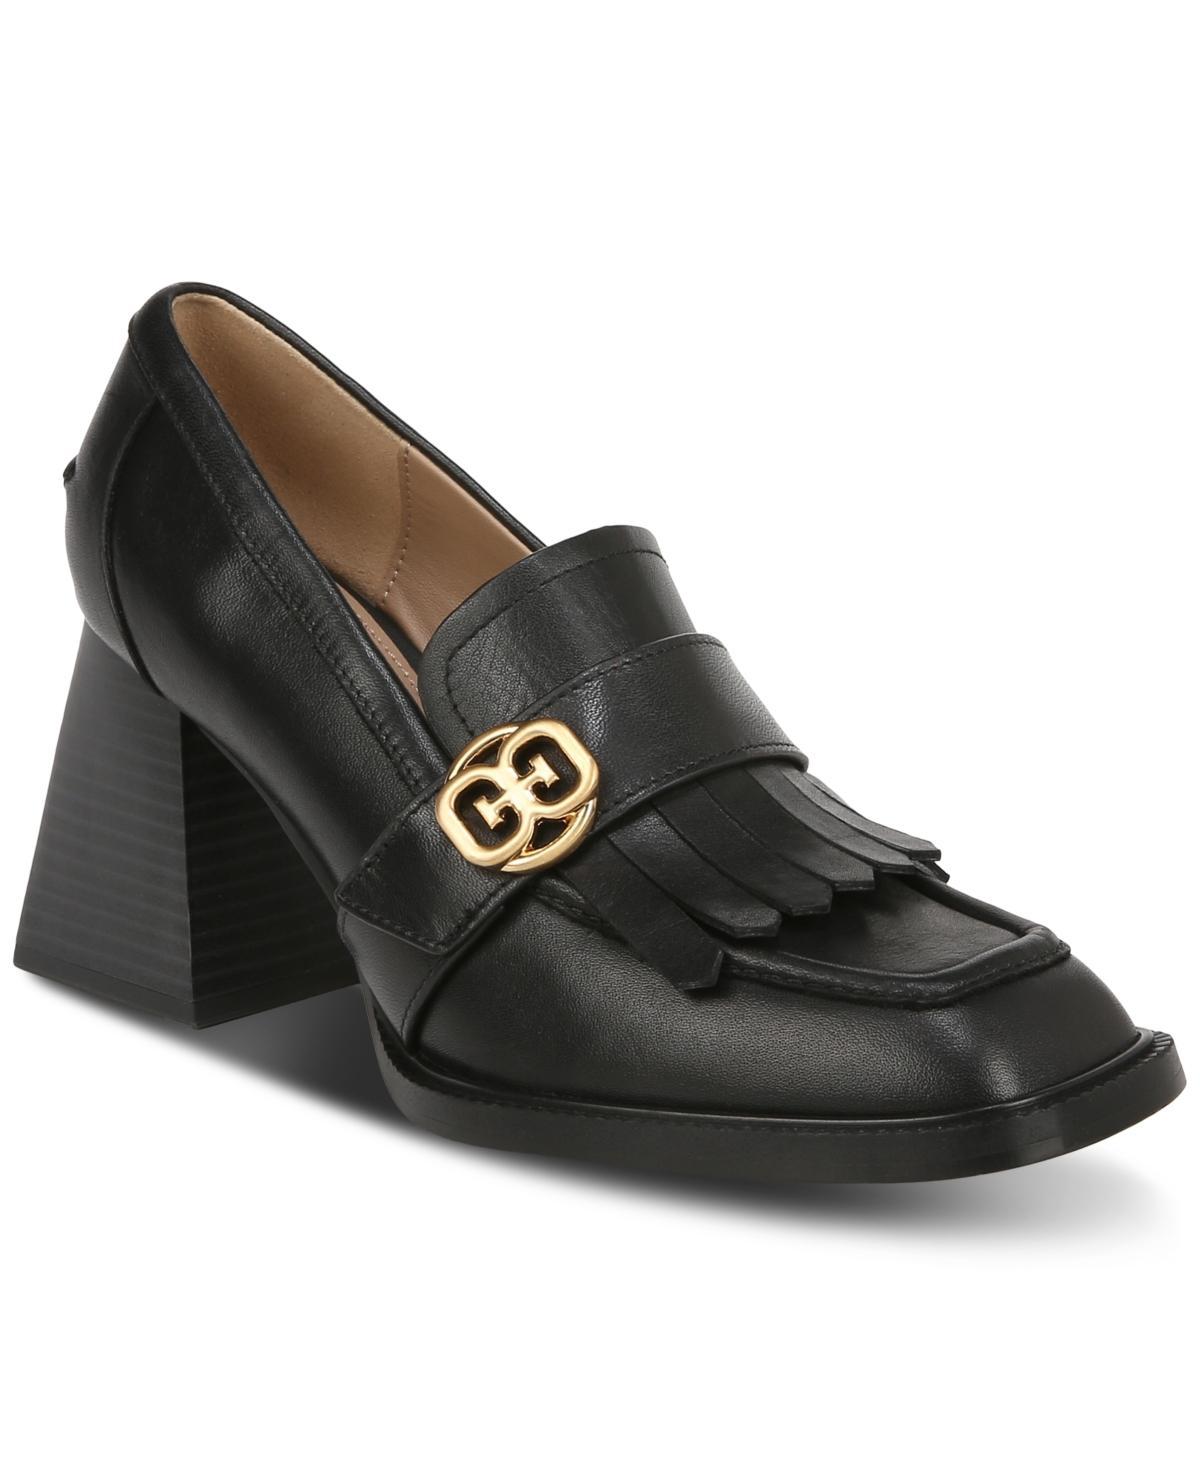 Sam Edelman Quinly Kiltie Loafer Product Image